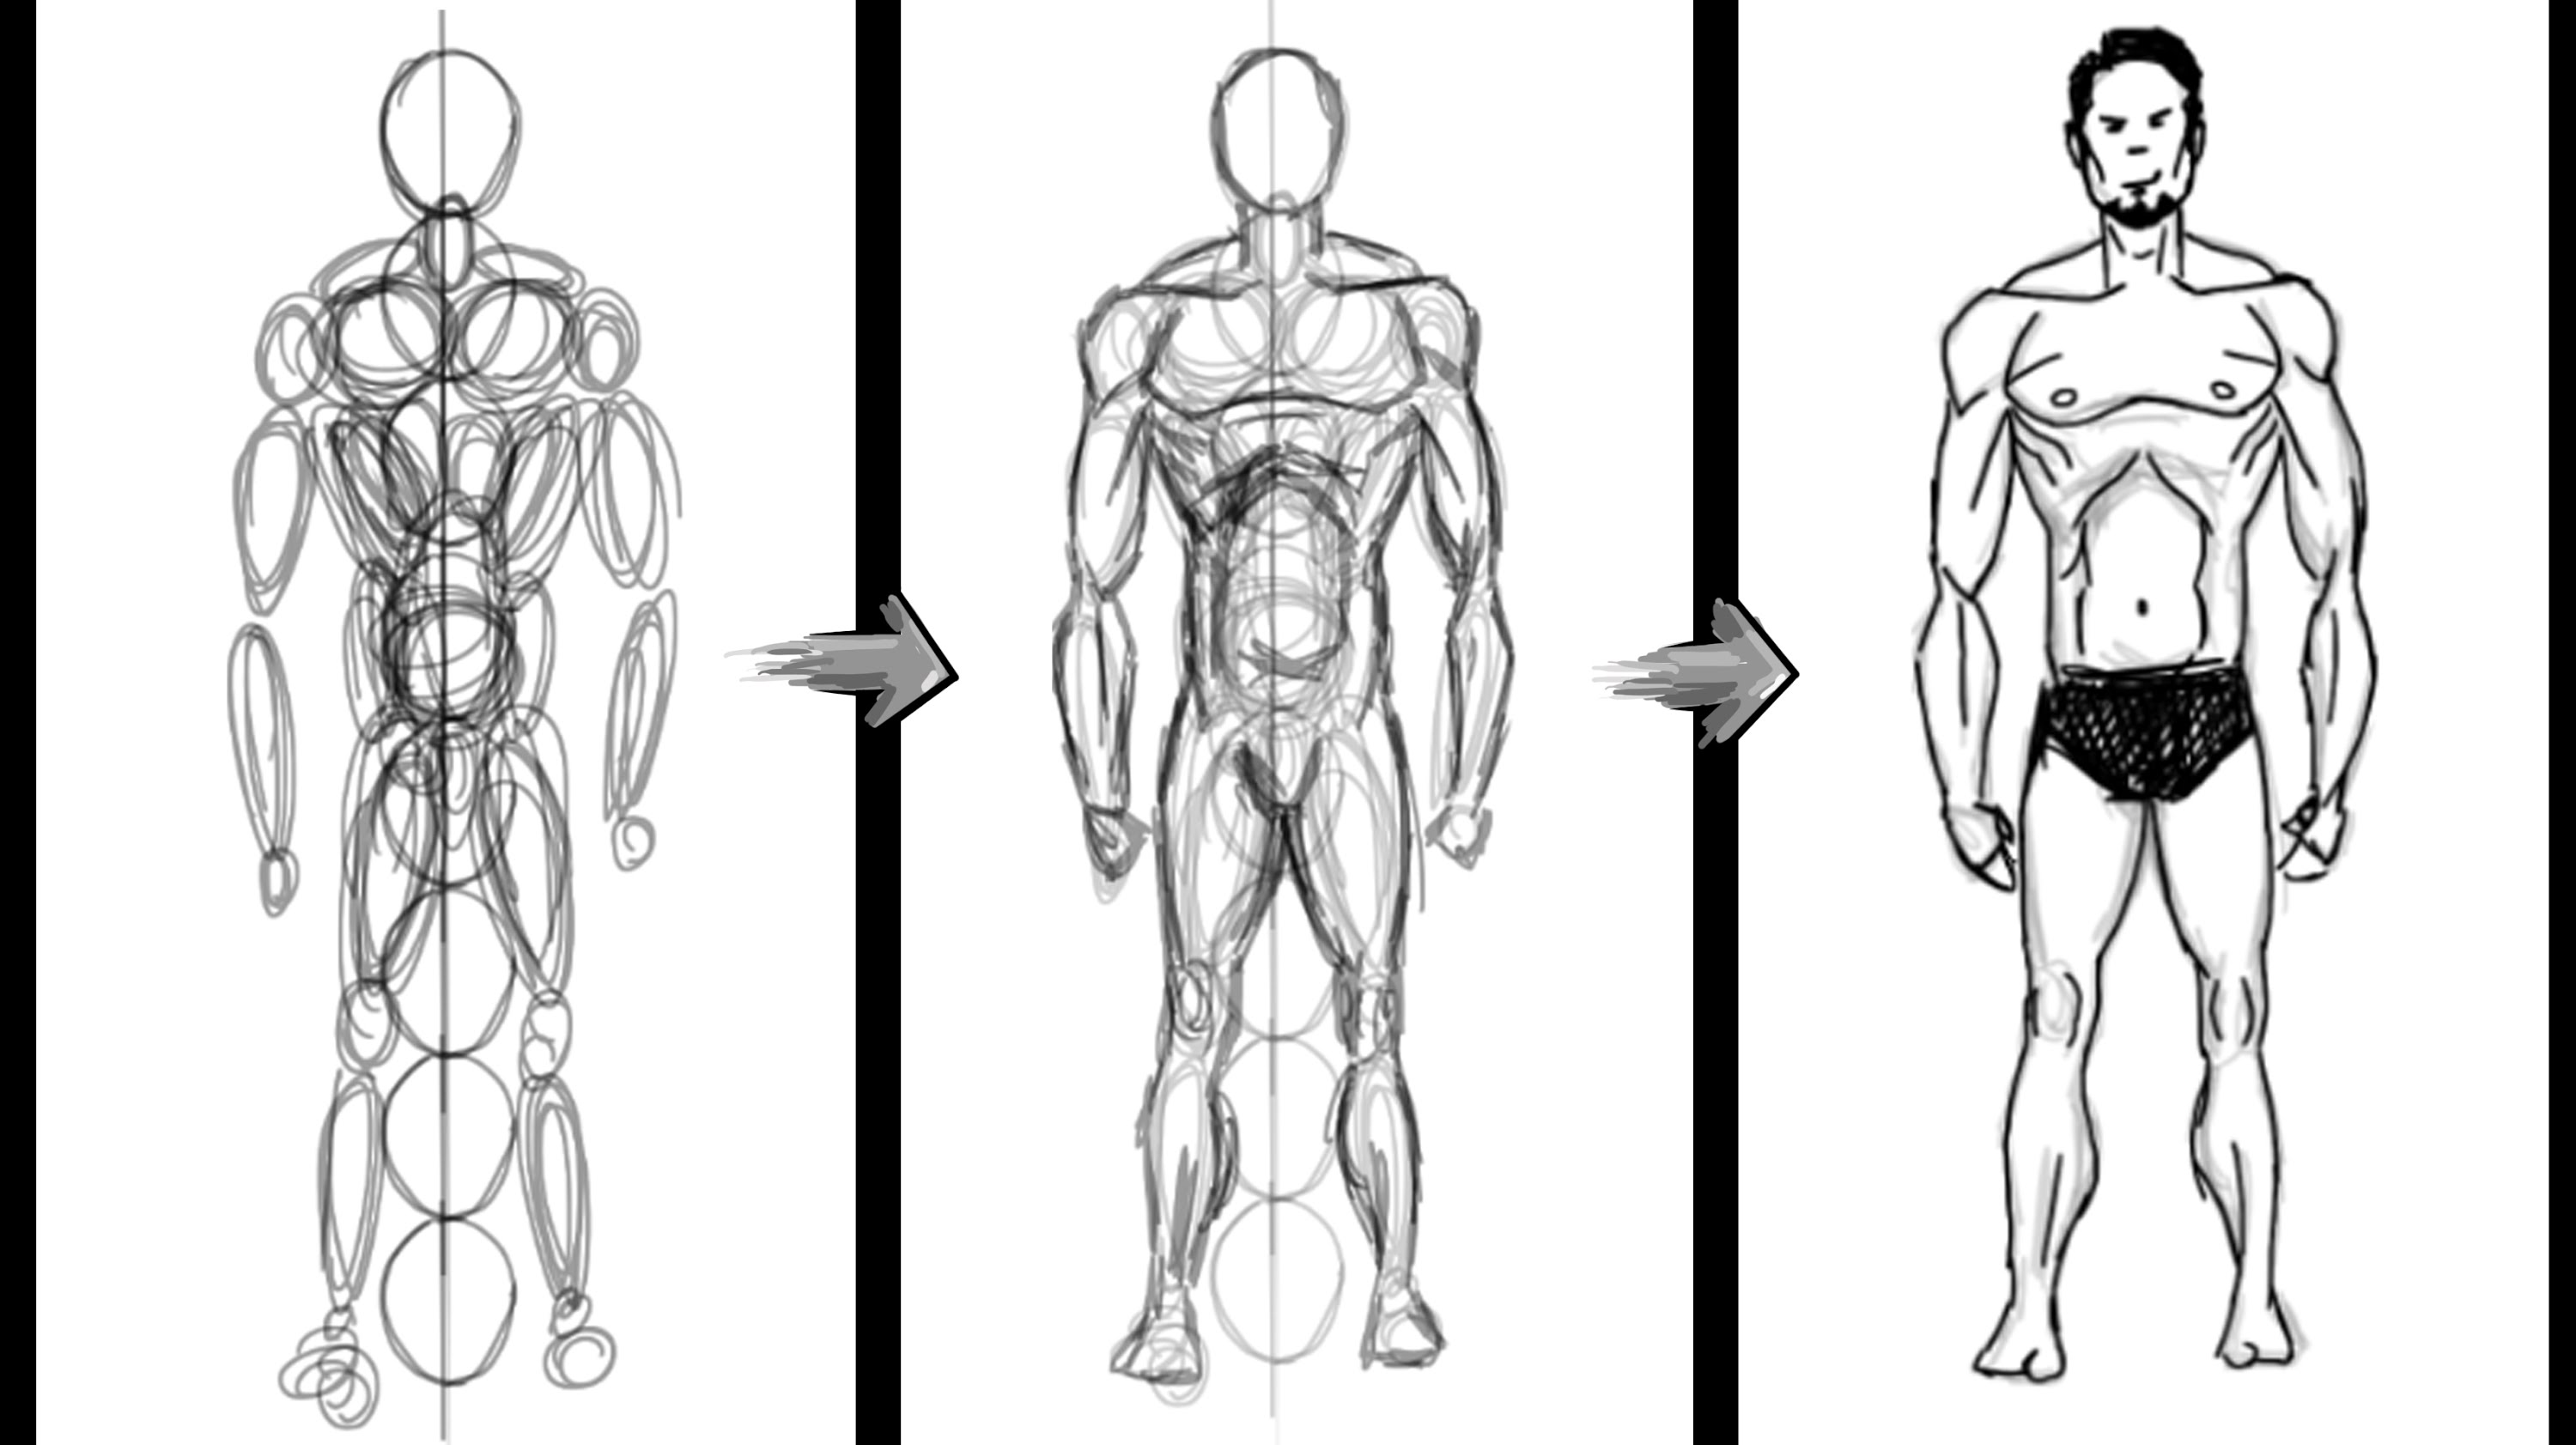 How To Draw Human Anatomy For Beginners - How To Draw Basic Human ...